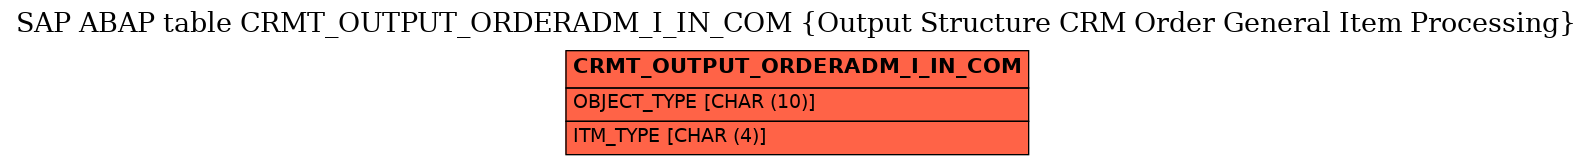 E-R Diagram for table CRMT_OUTPUT_ORDERADM_I_IN_COM (Output Structure CRM Order General Item Processing)